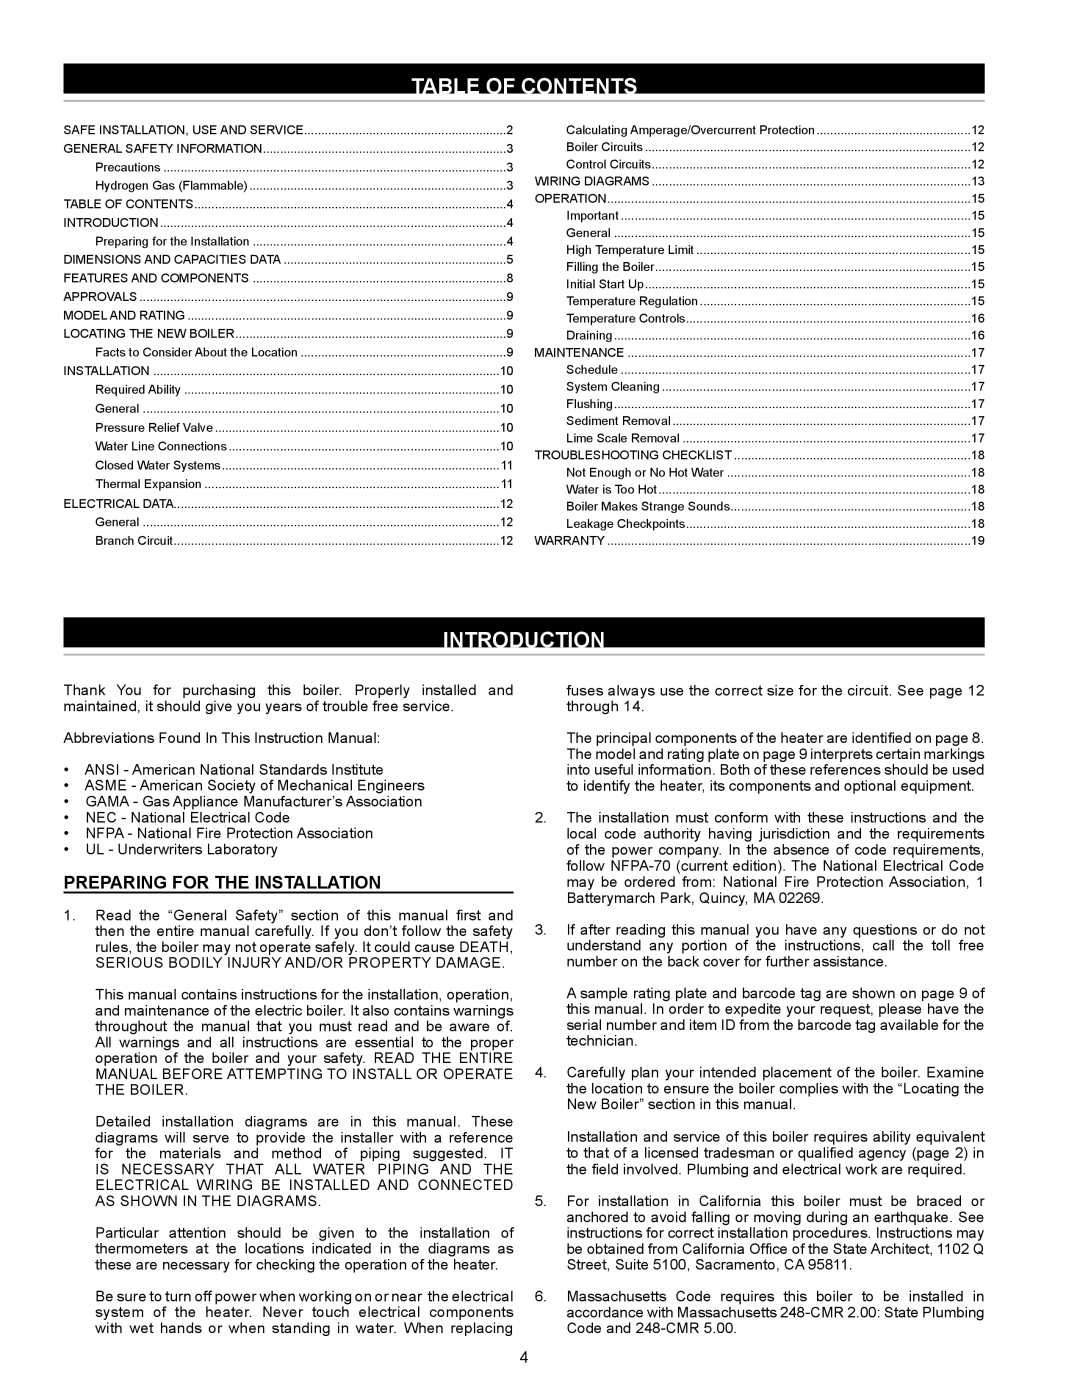 State Industries SW 37-670 instruction manual Table Of Contents, Introduction, Preparing for the Installation 